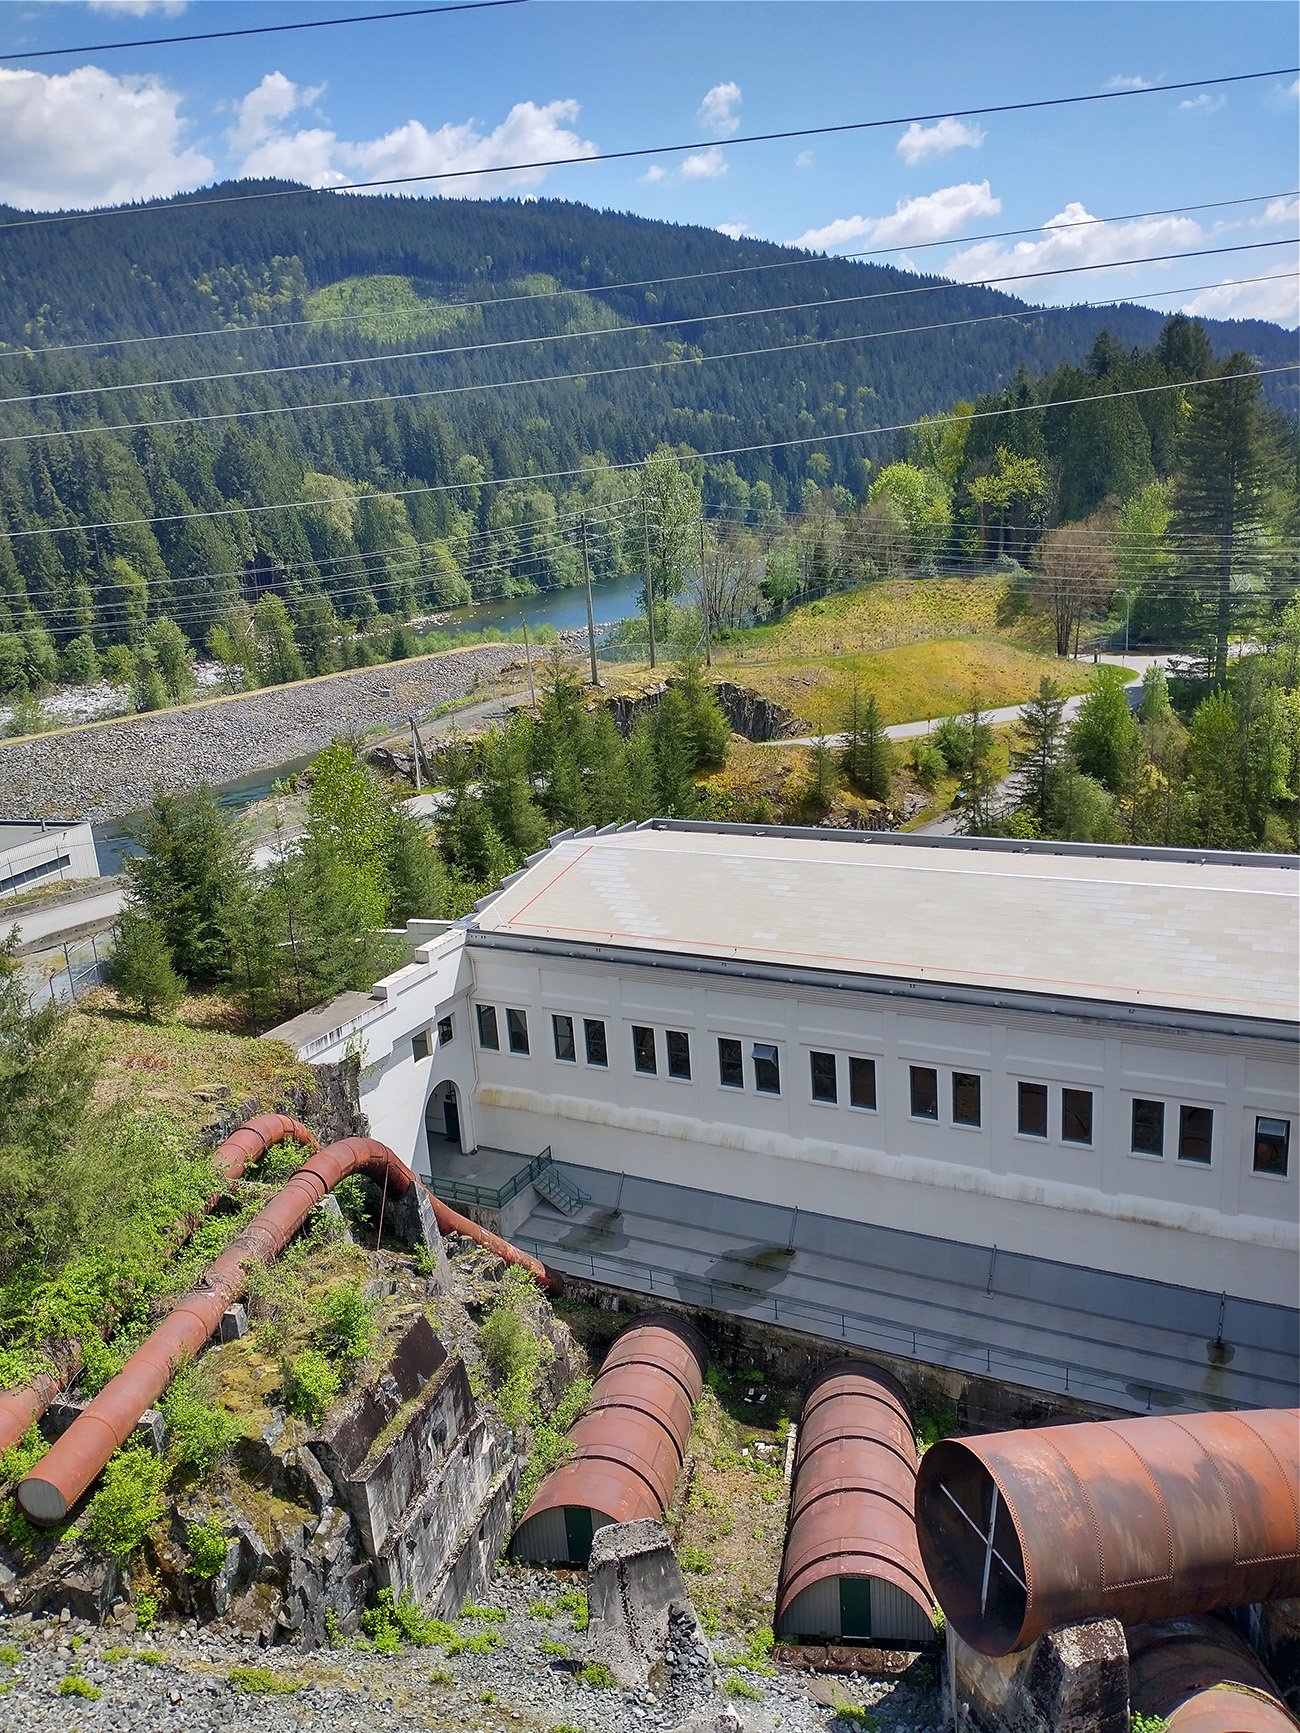 There's a visitor center for the power station and some trails if you're into that. 